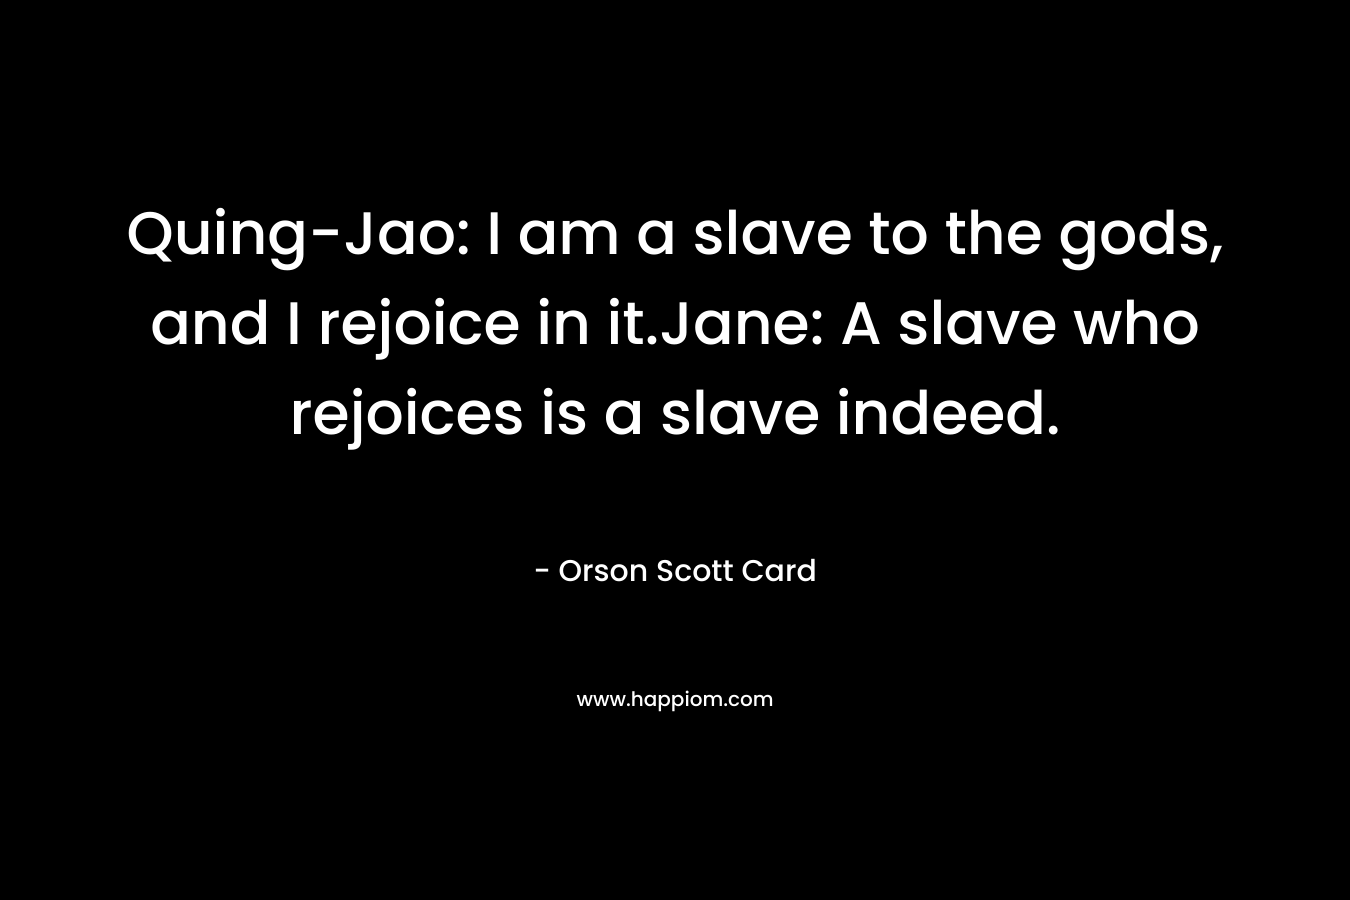 Quing-Jao: I am a slave to the gods, and I rejoice in it.Jane: A slave who rejoices is a slave indeed. – Orson Scott Card